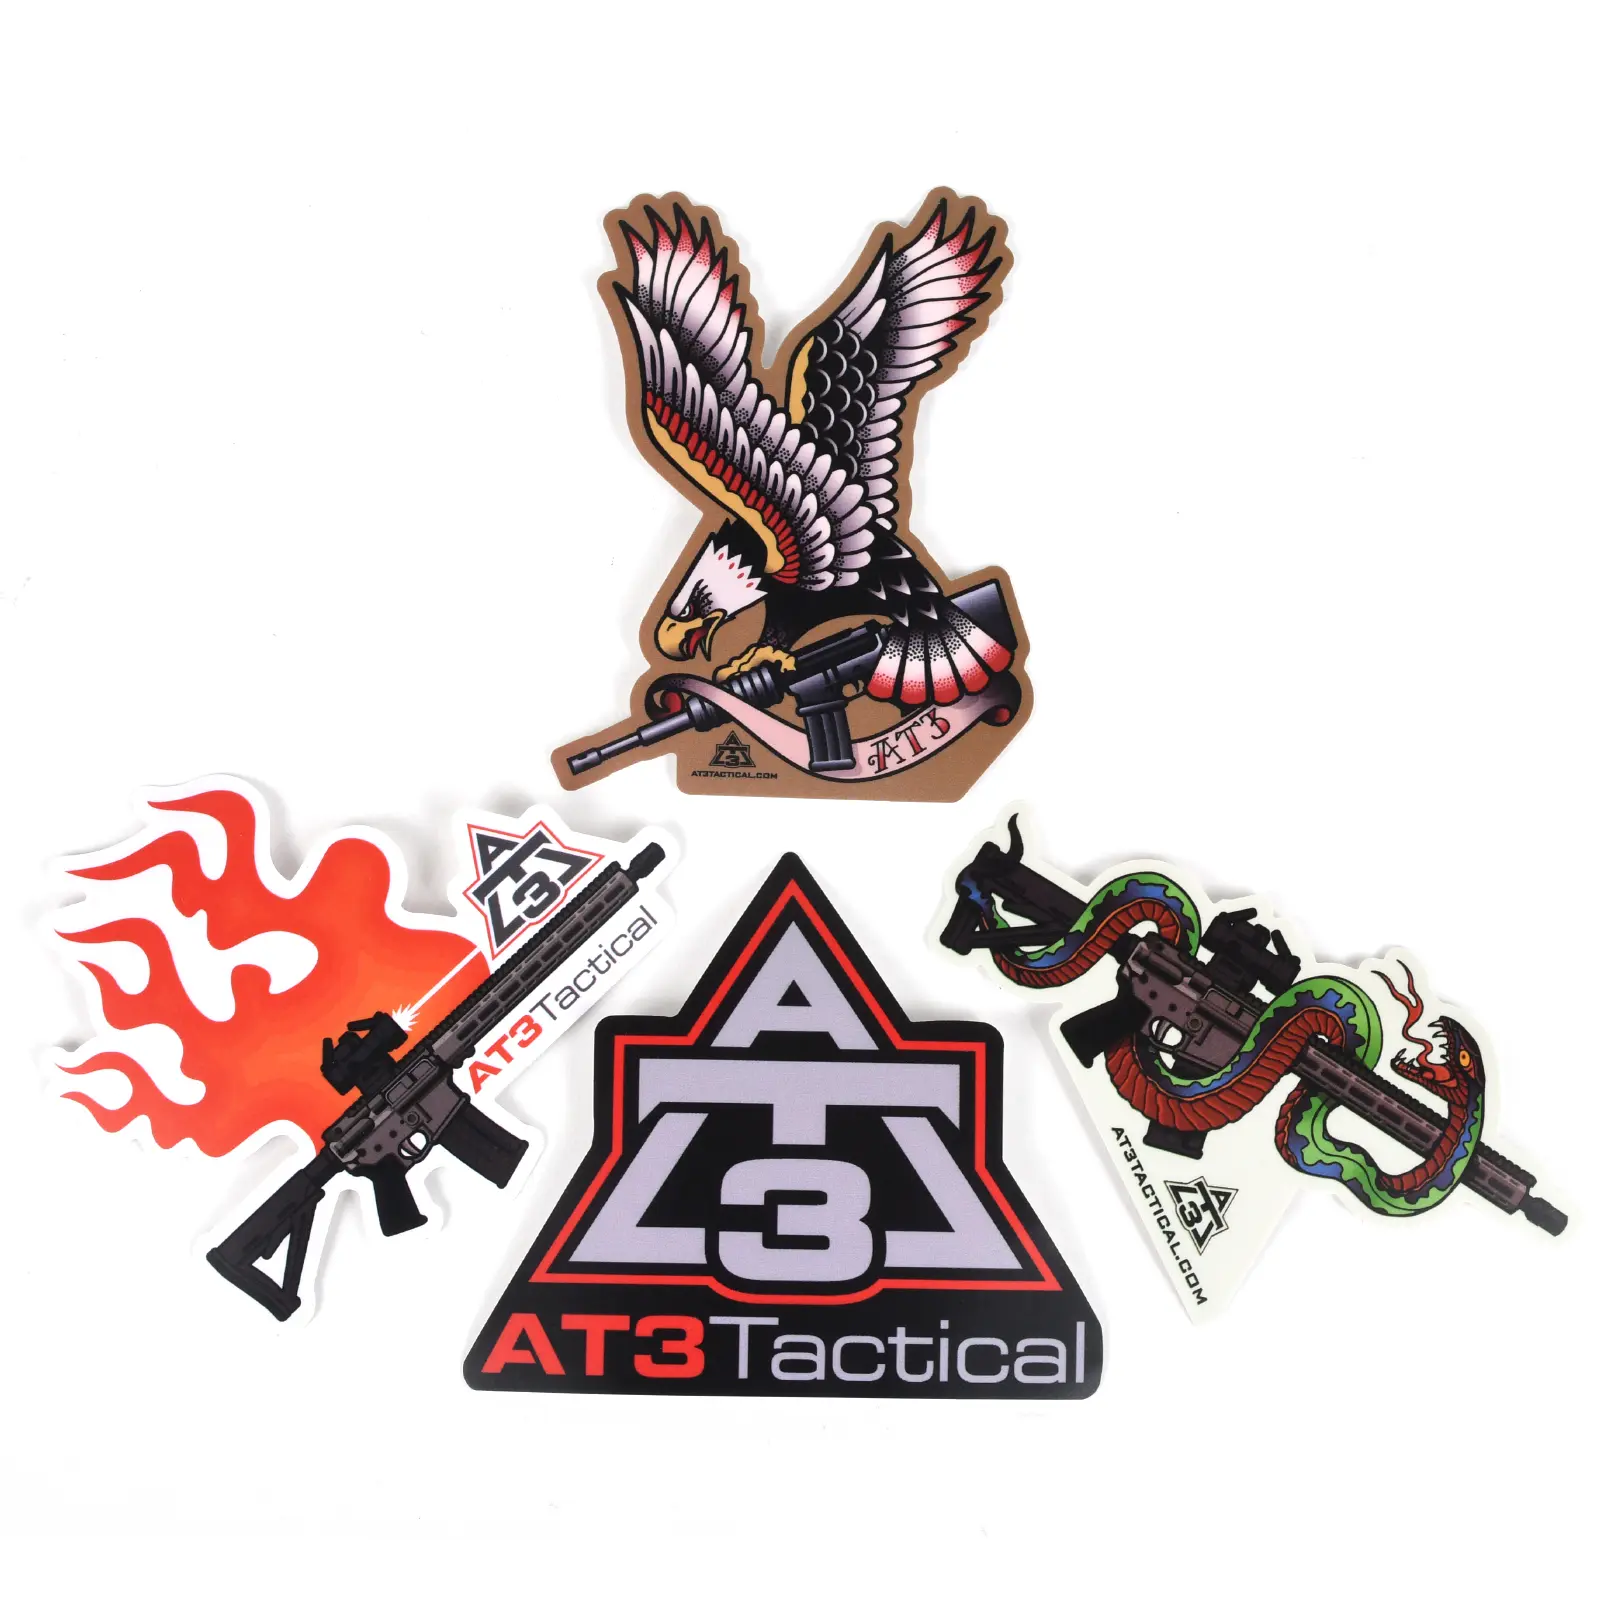 AT3 Tactical Sticker Pack - Spring 2021